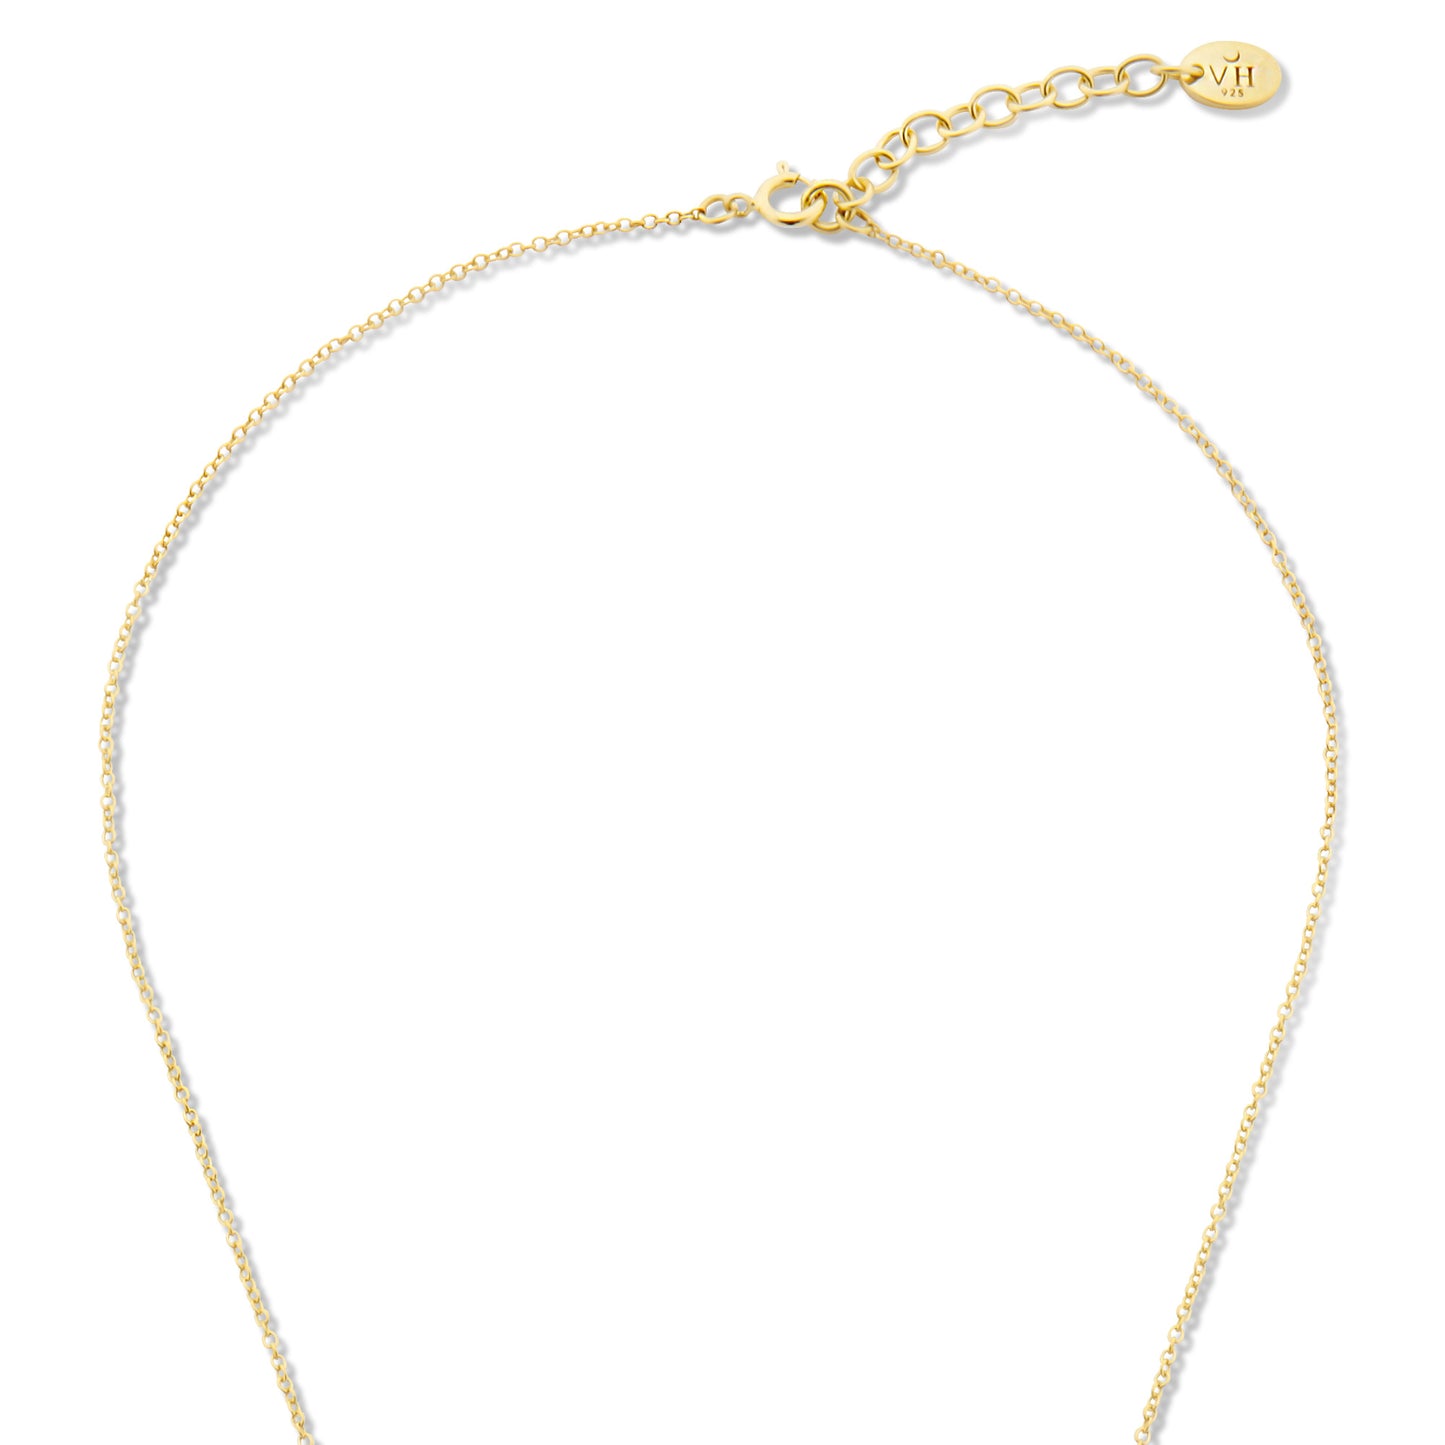 Venus 925 sterling silver gold plated necklace with birthflower